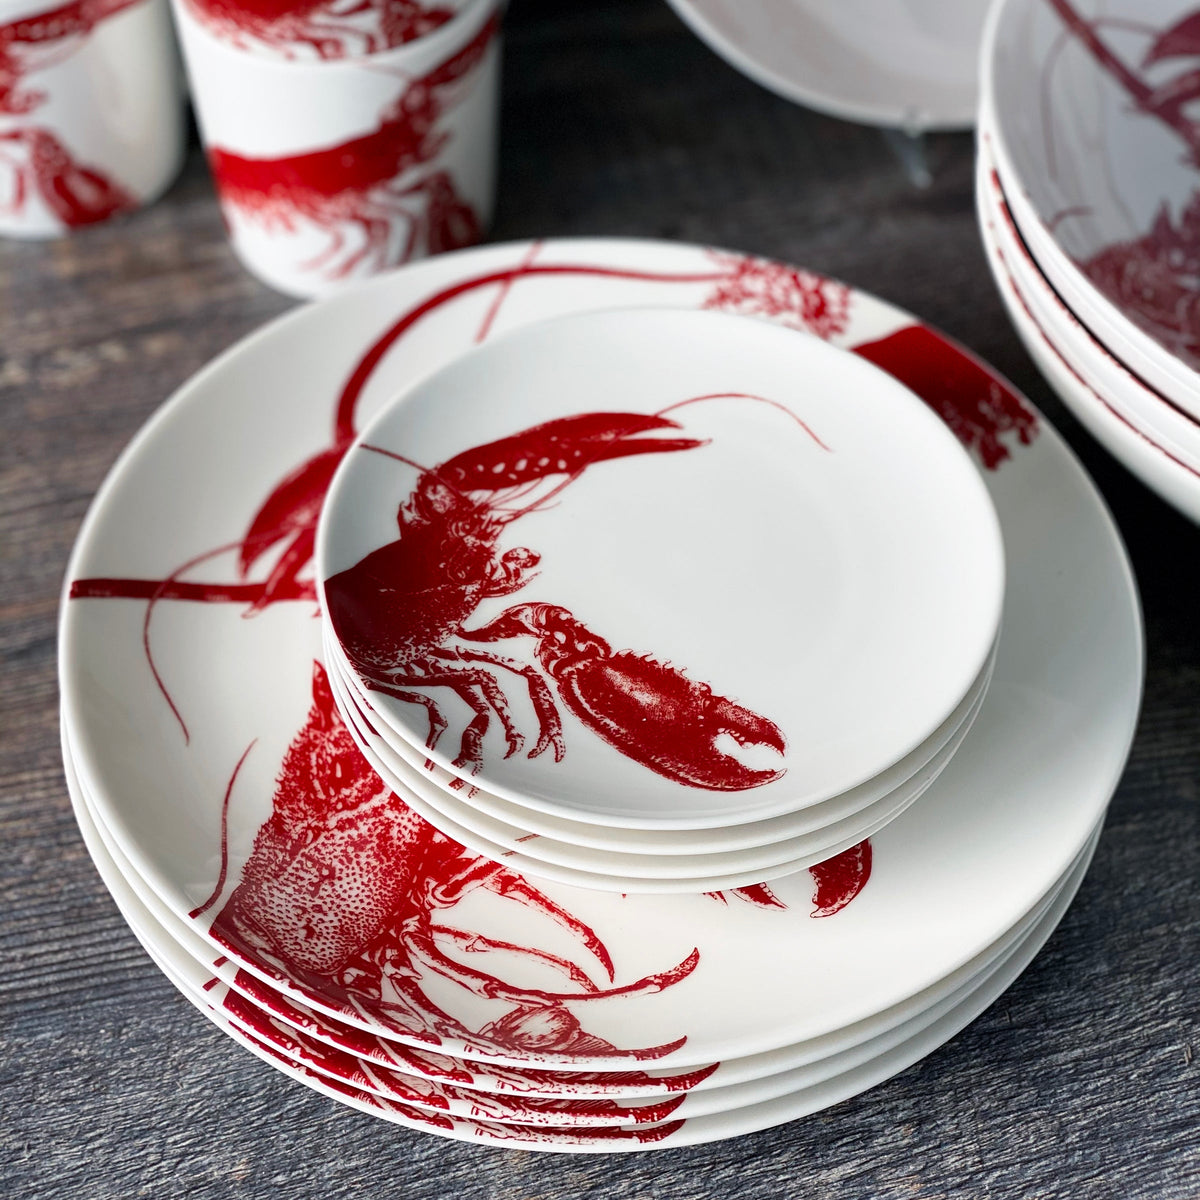 A Complete Clambake 16 pc. Set of lobster plates from Caskata Artisanal Home.